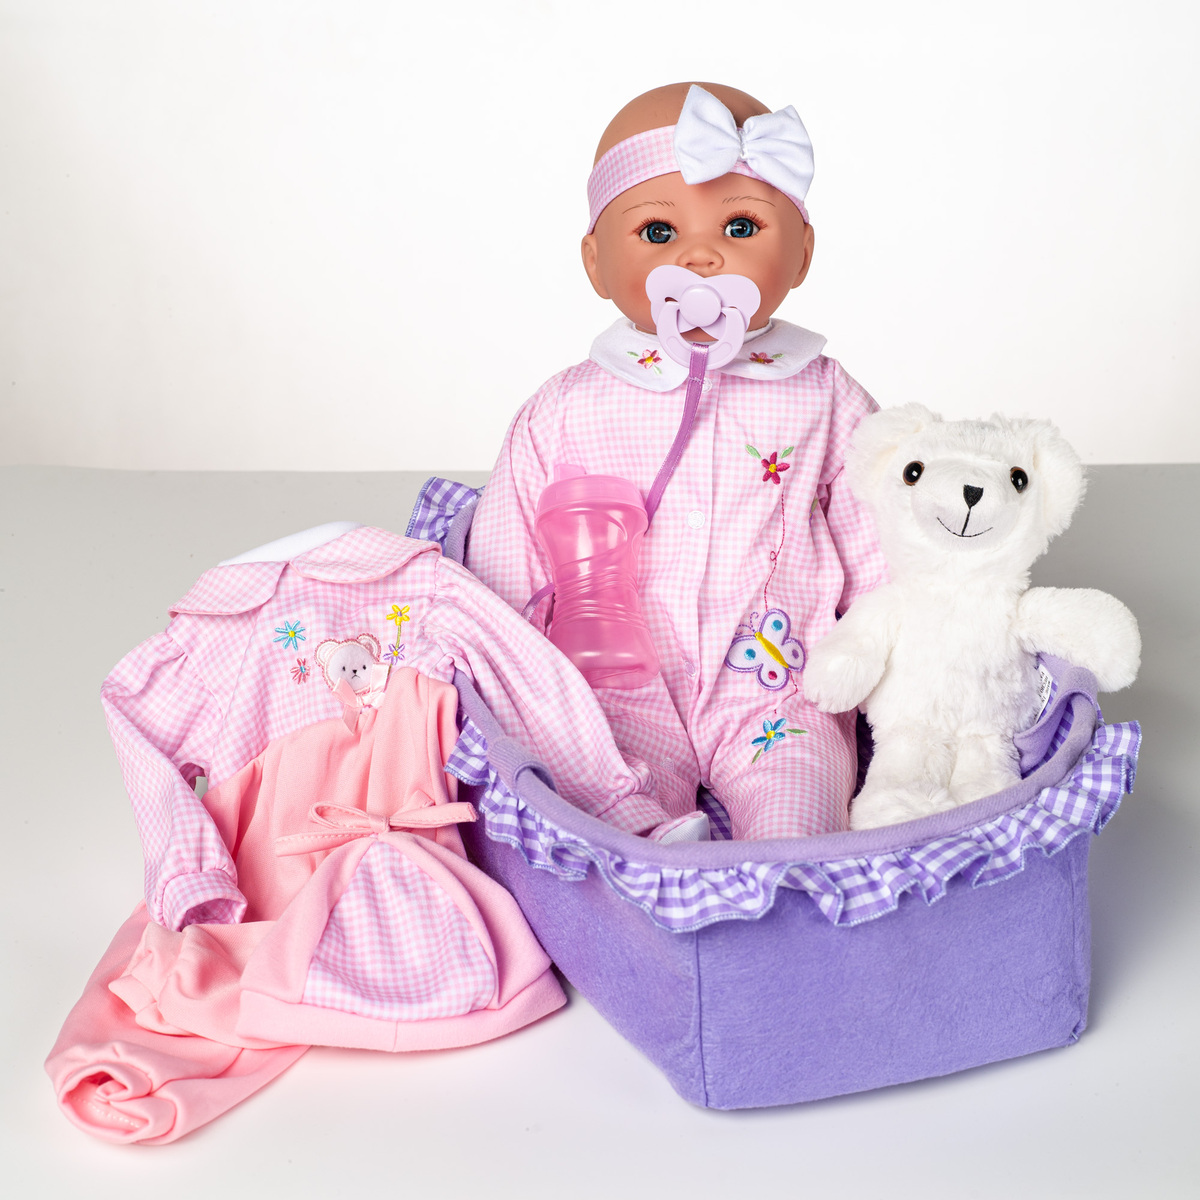 Baby emma doll with accessories